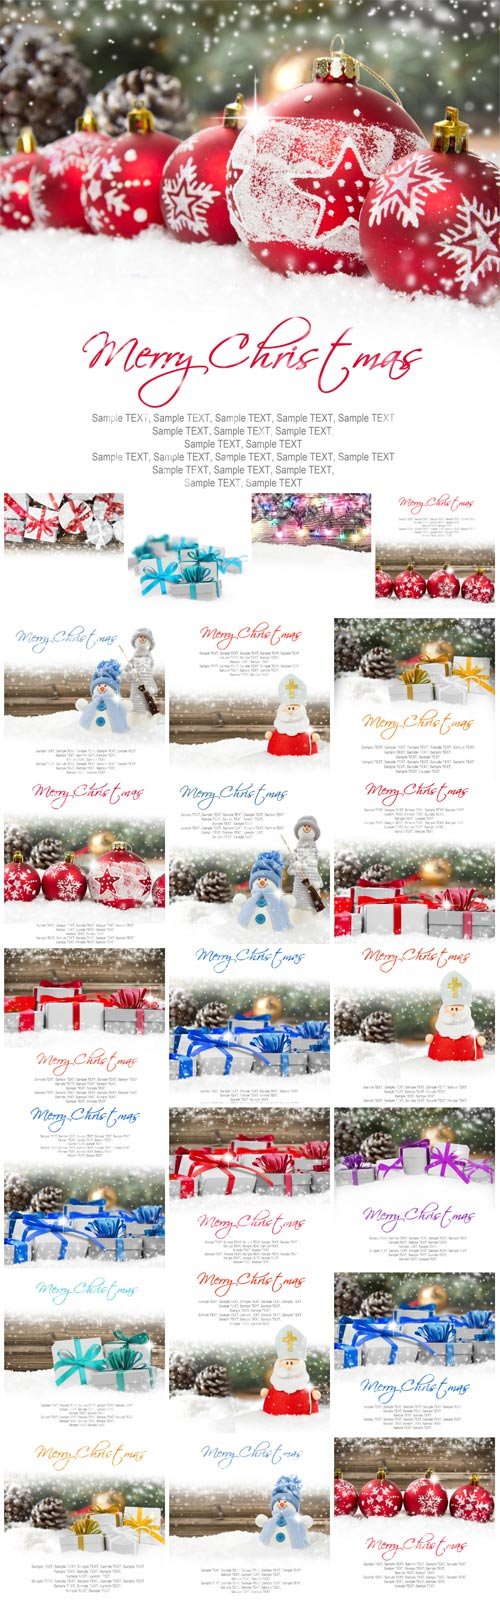 New Year and Christmas stock photos №15